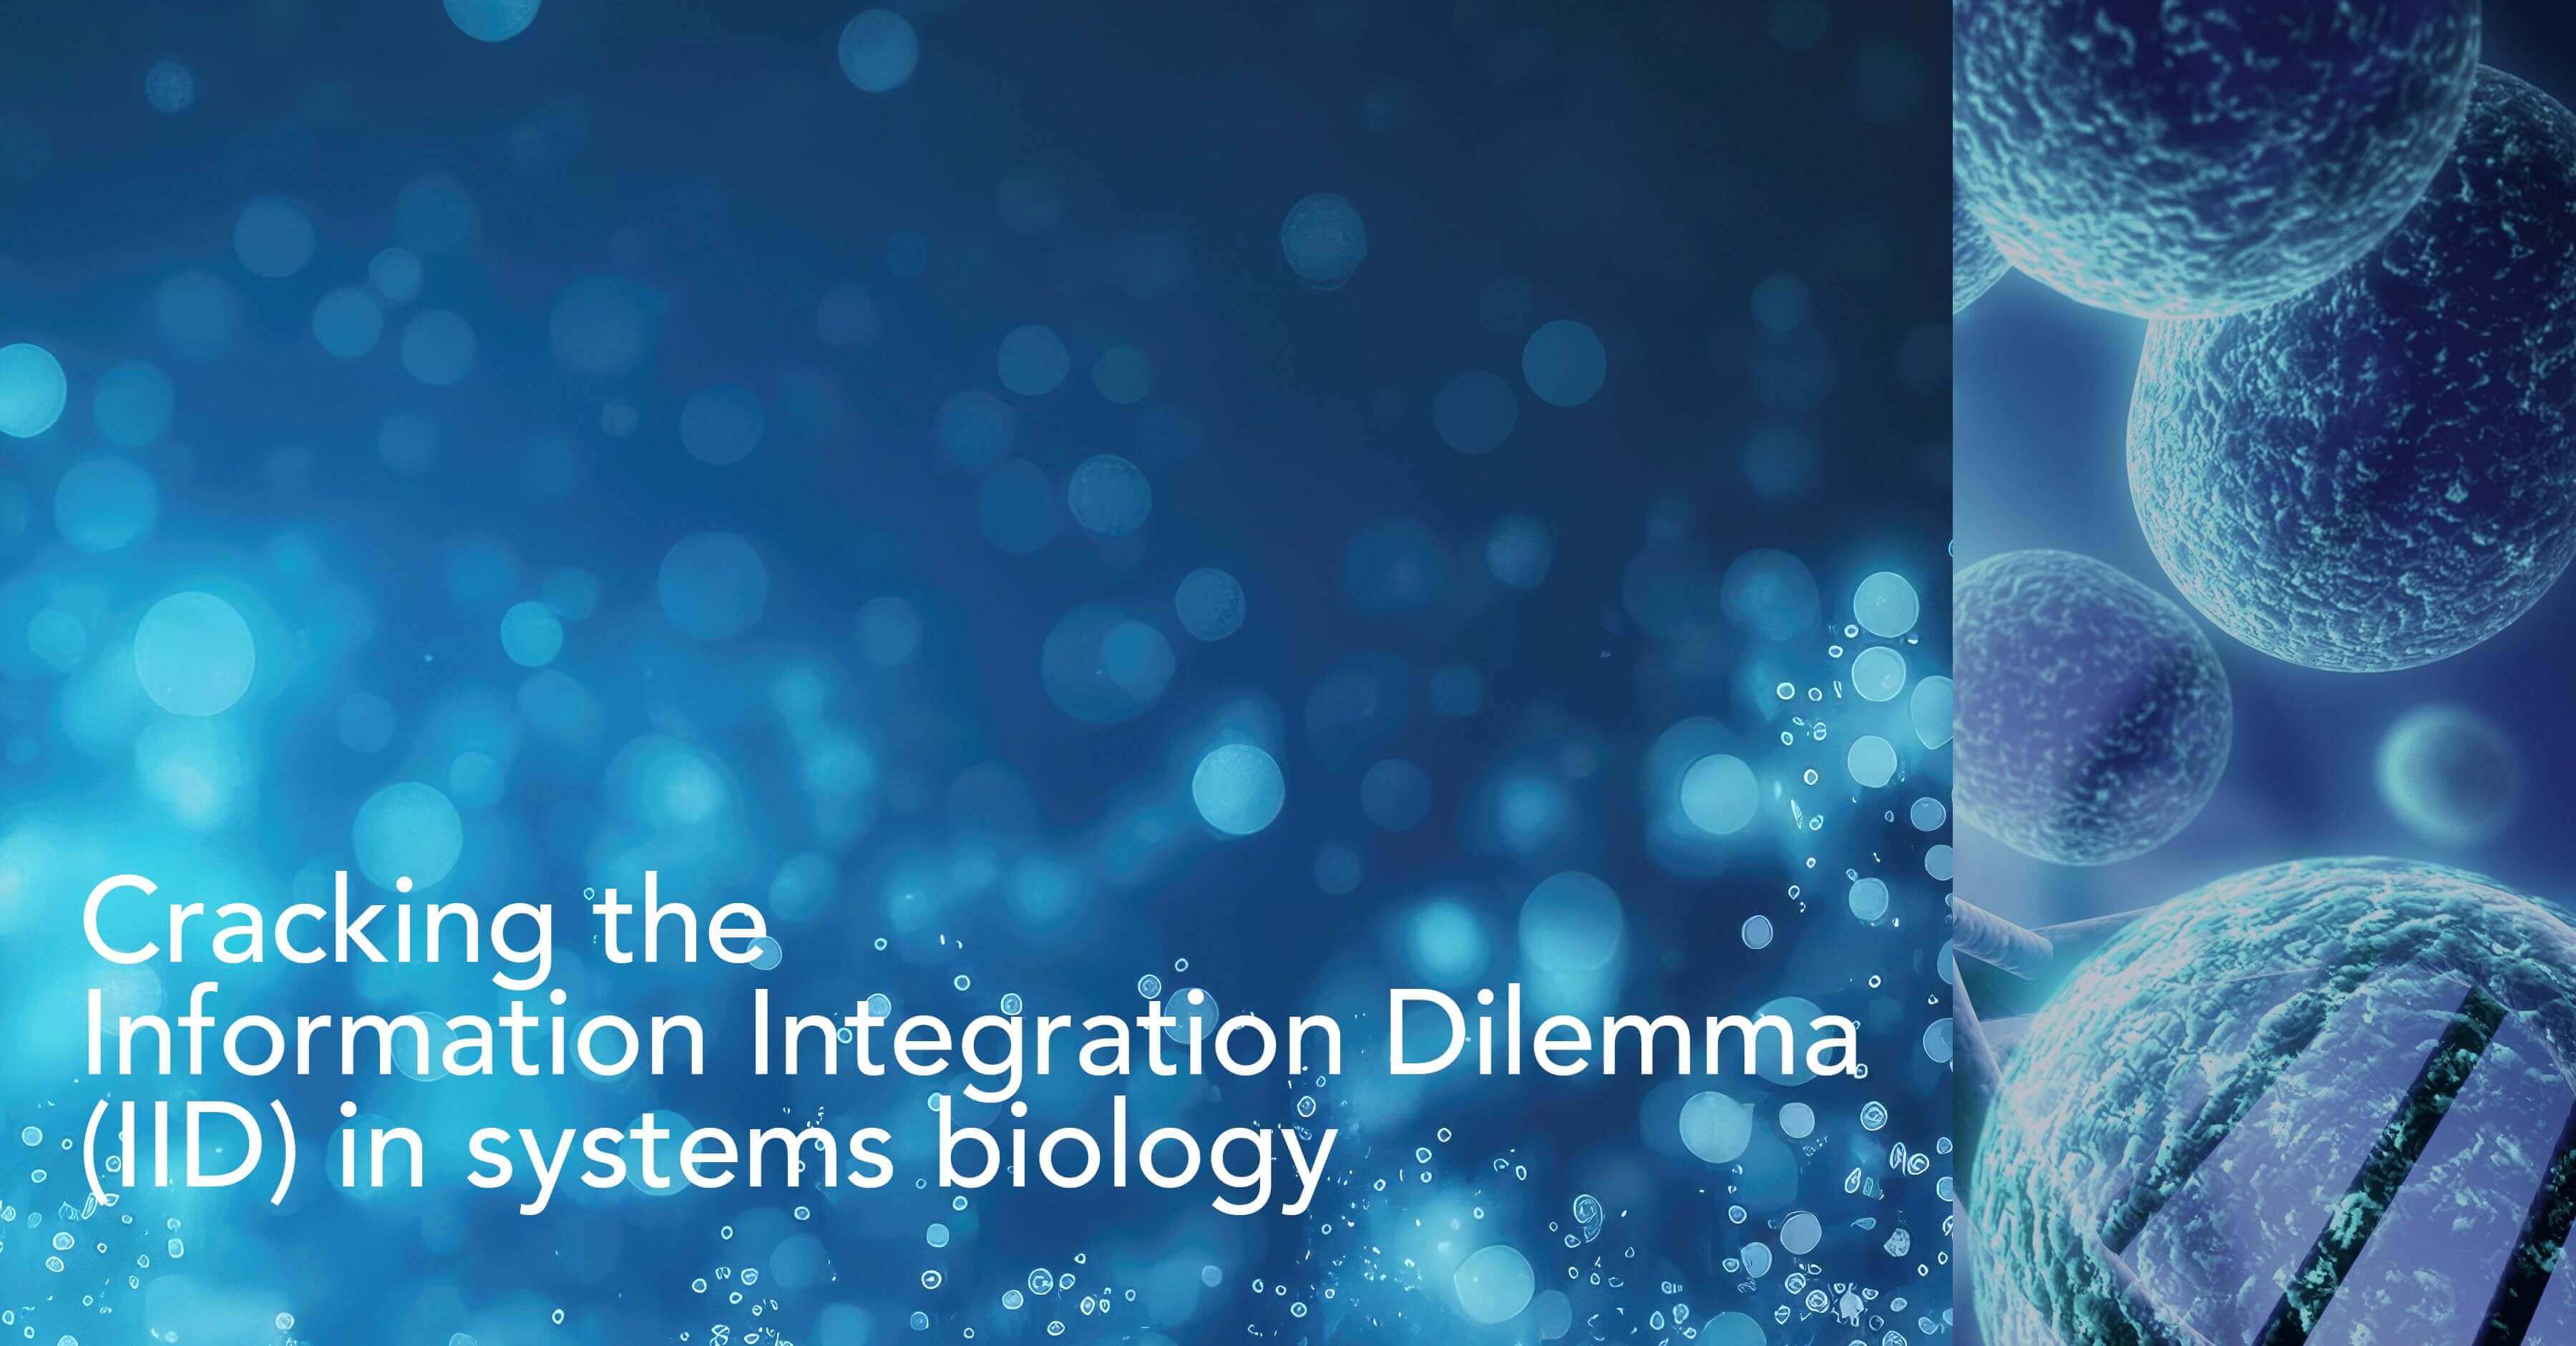 Cracking the Information Integration Dilemma (IID) in systems biology